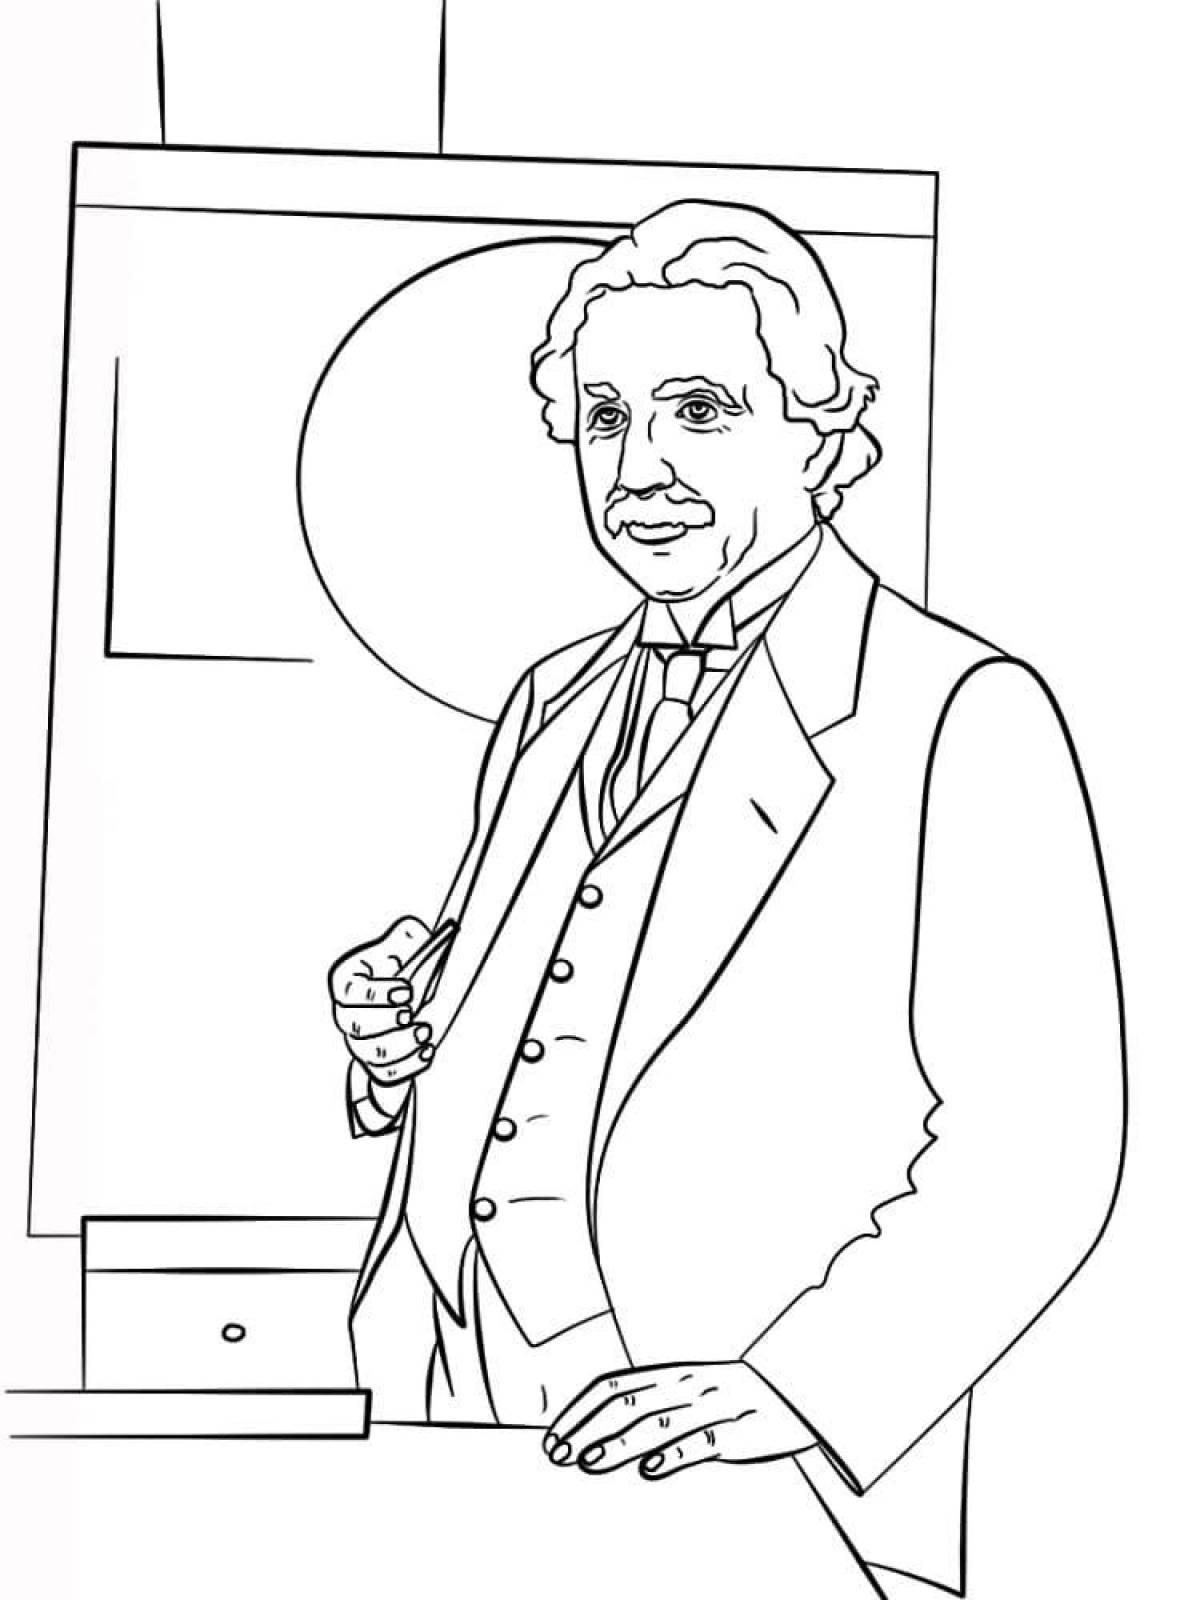 Edison's playful coloring page